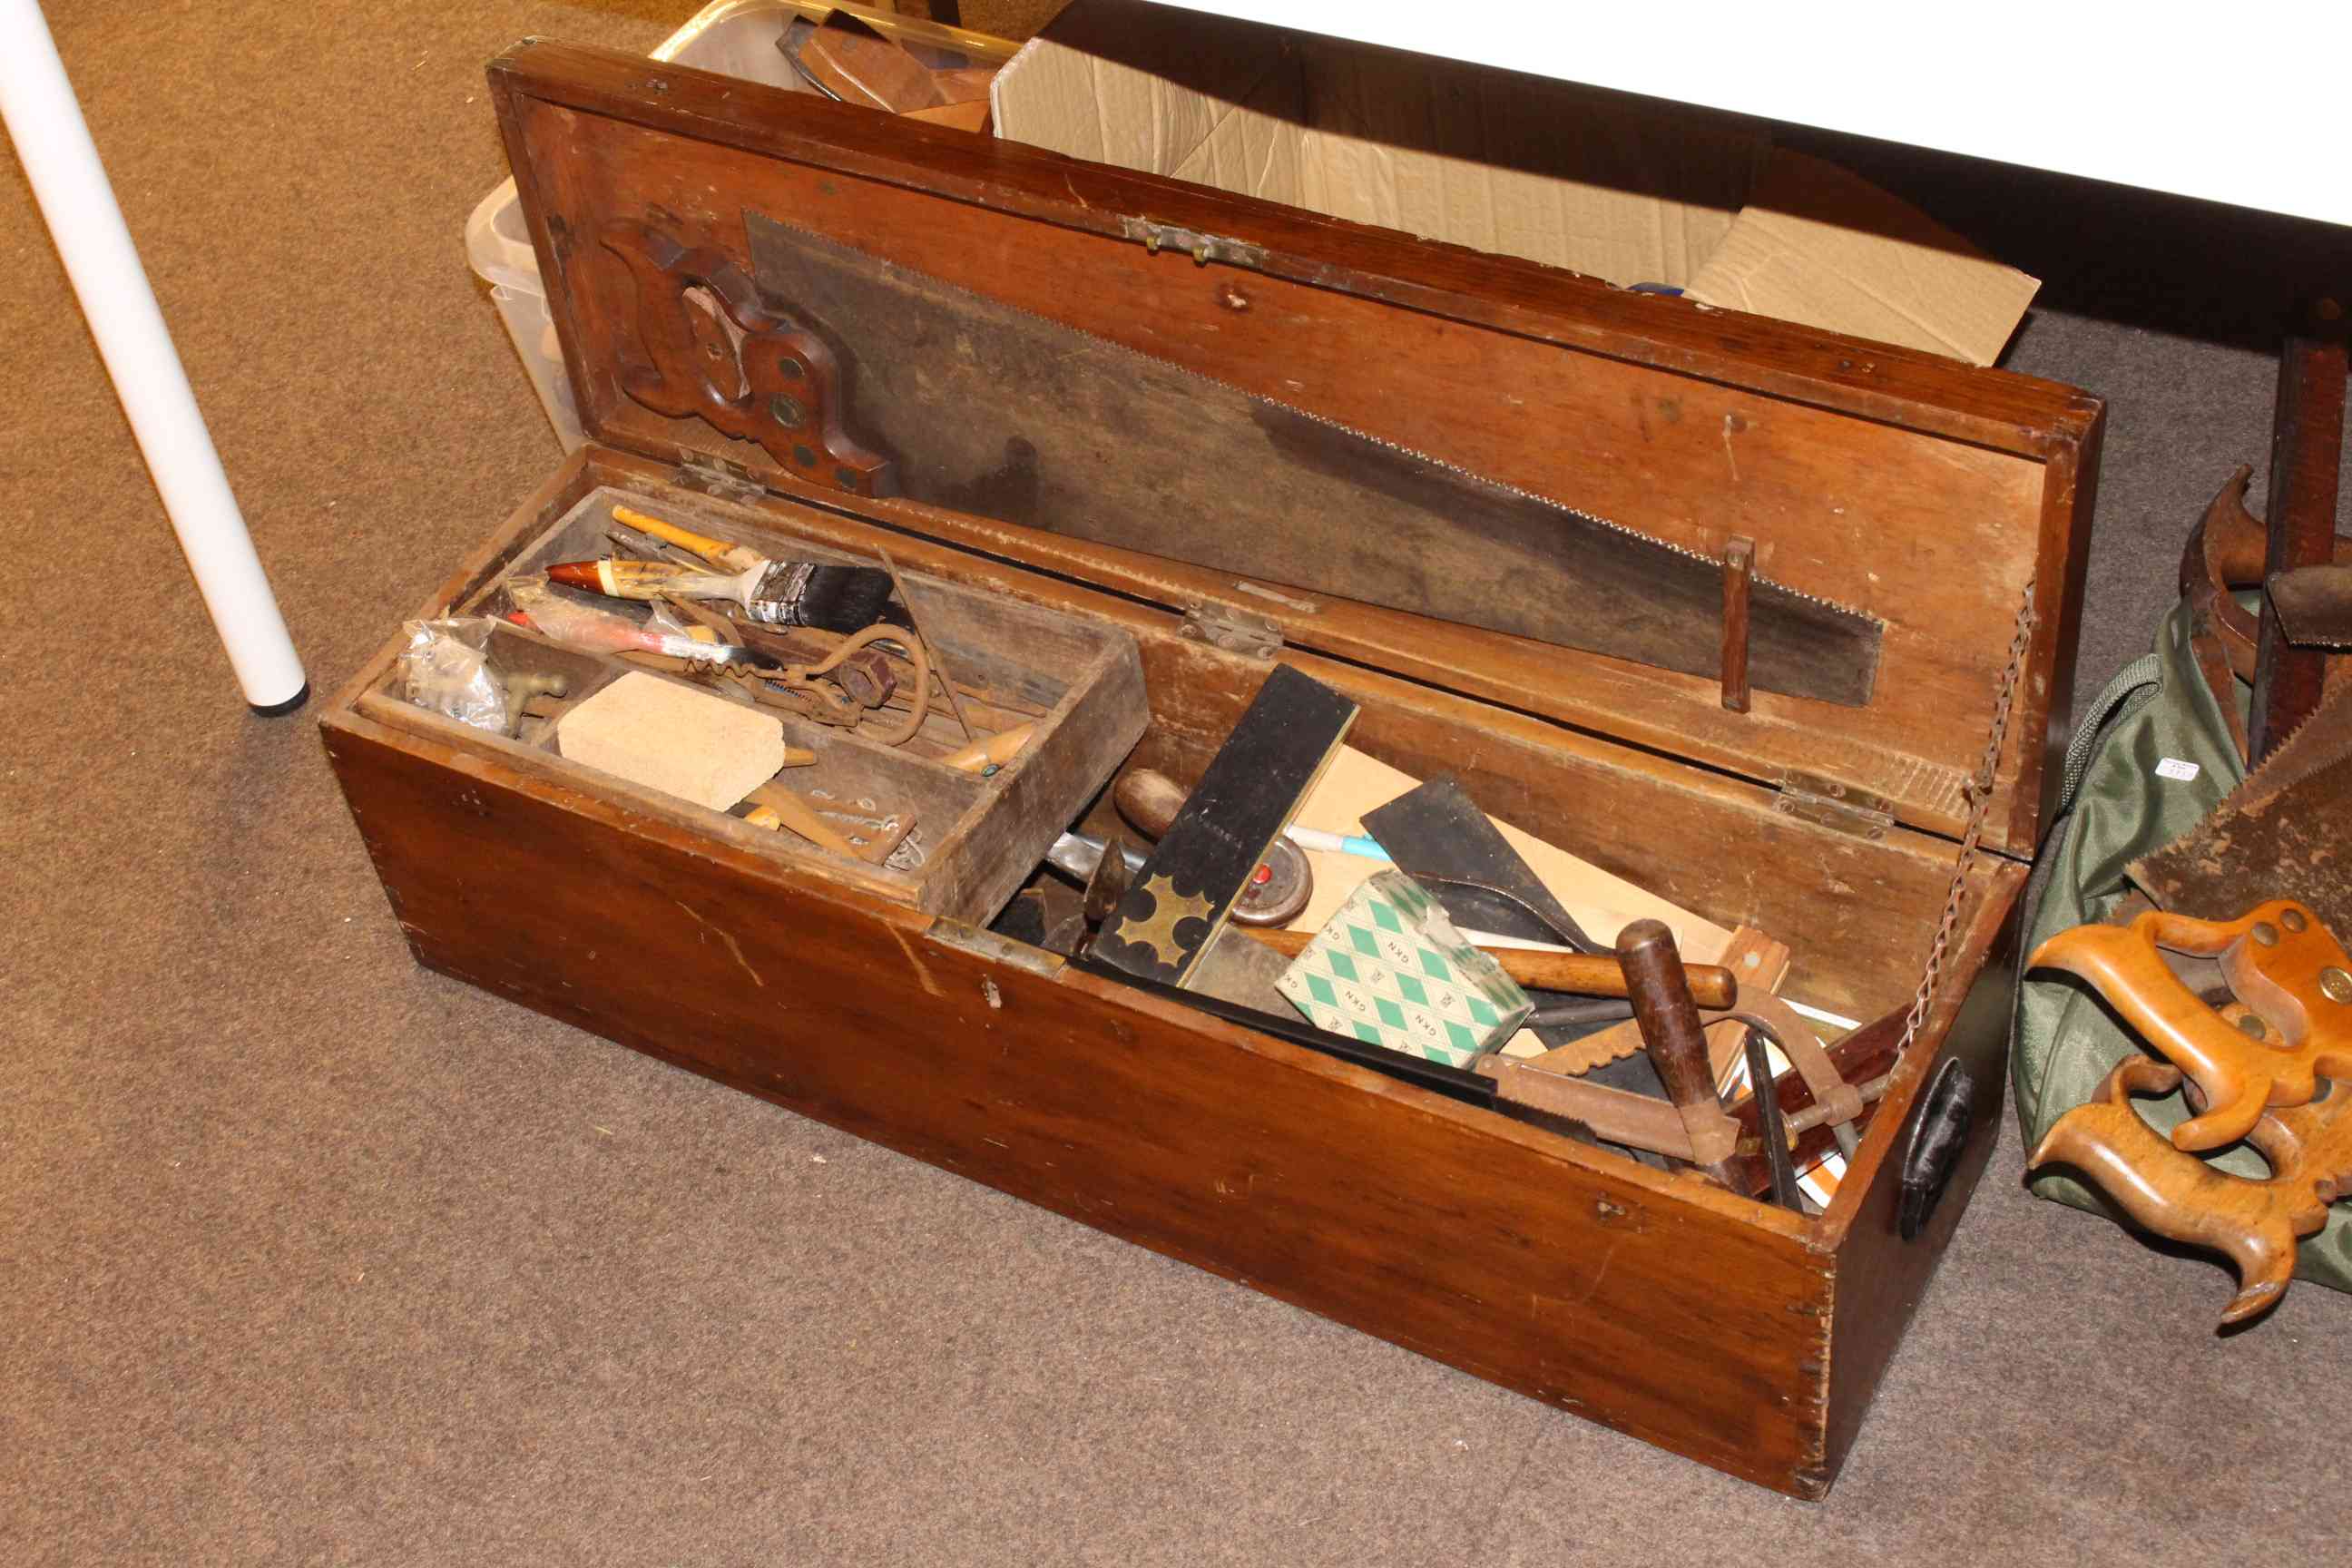 Tool box and collection of tools including planes, saws, etc. - Image 2 of 2